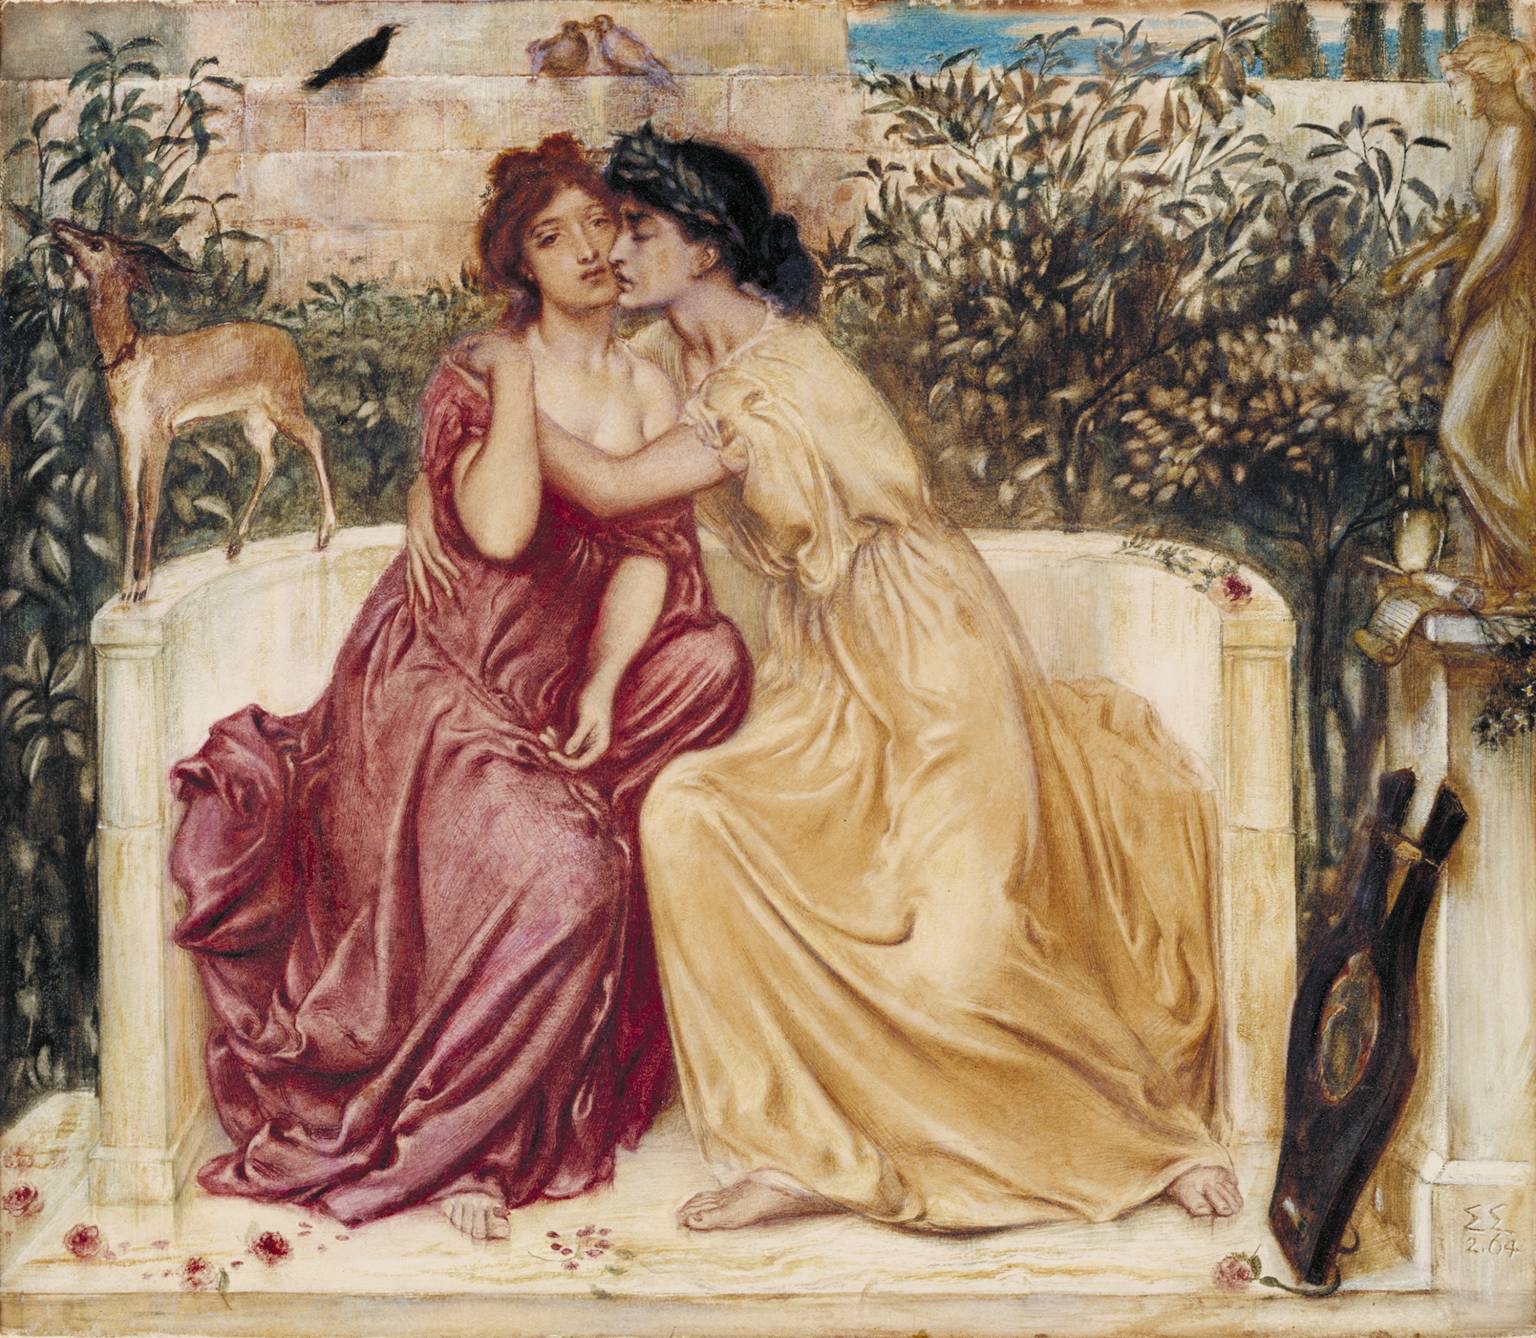 The queer-coded world of the ancient Mediterranean 